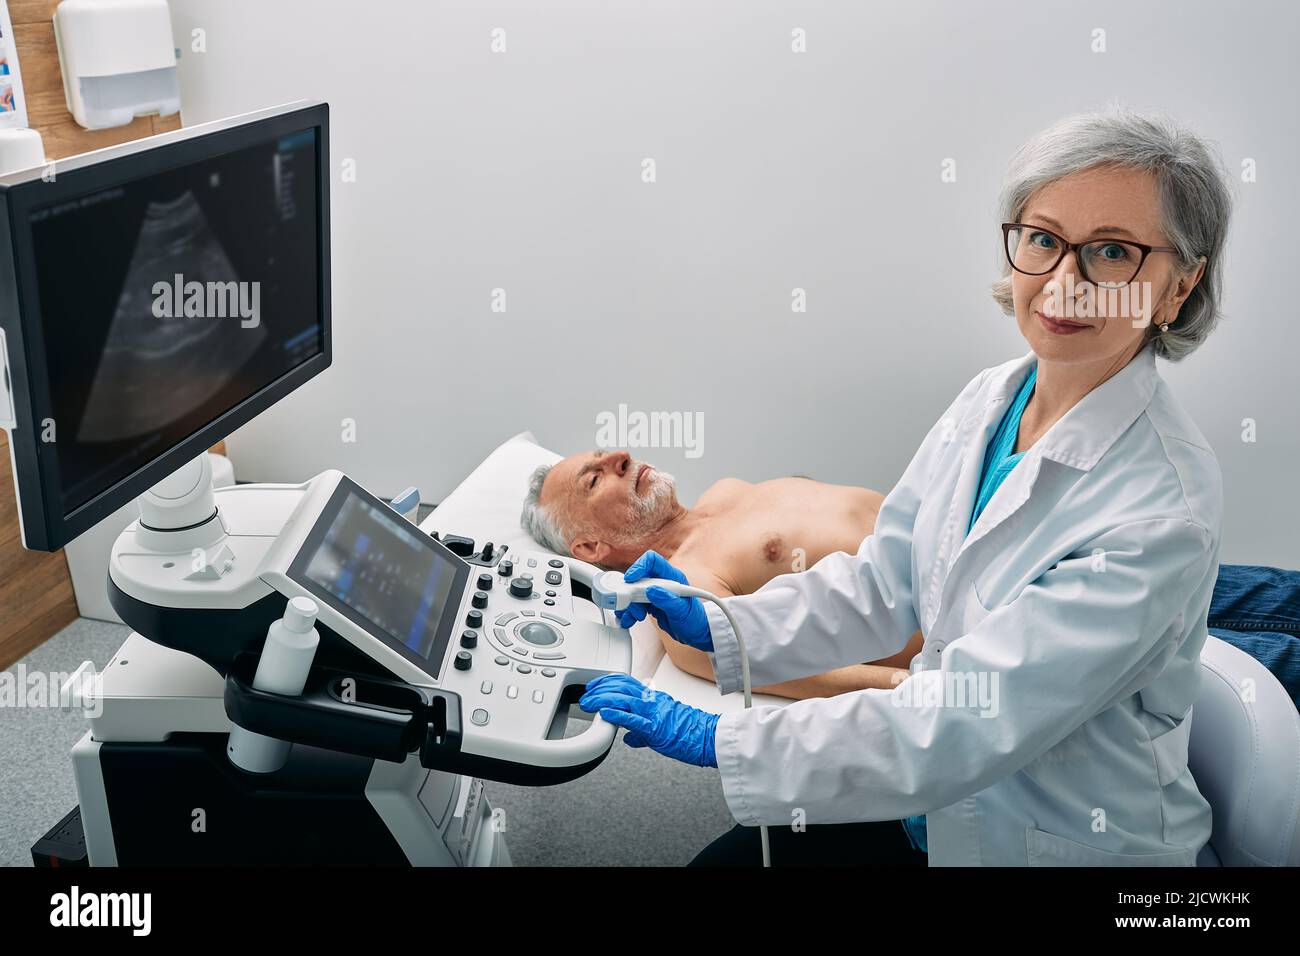 Sonographer occupation. Portrait of sonographer near the ultrasound machine at medical clinic during male patient's body ultrasound scan Stock Photo